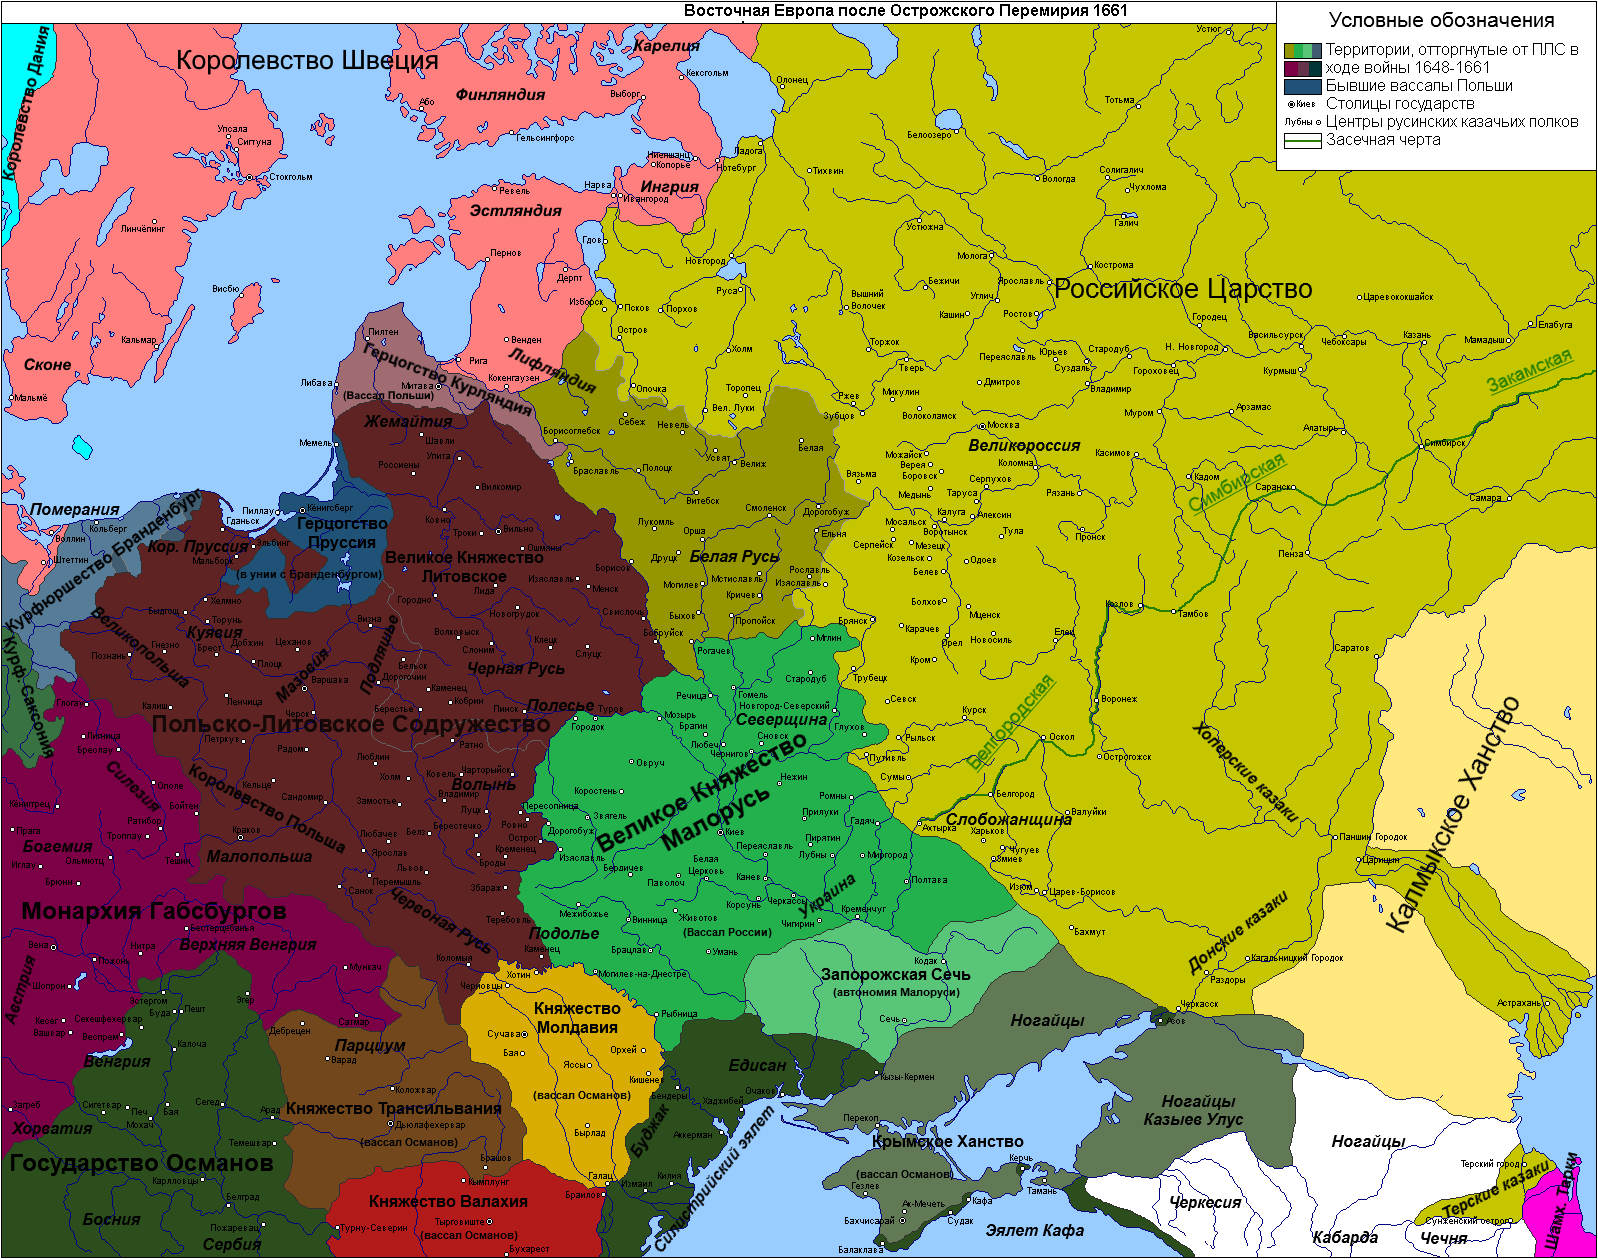 eastern_europe_after_the_ostrog_truce_of